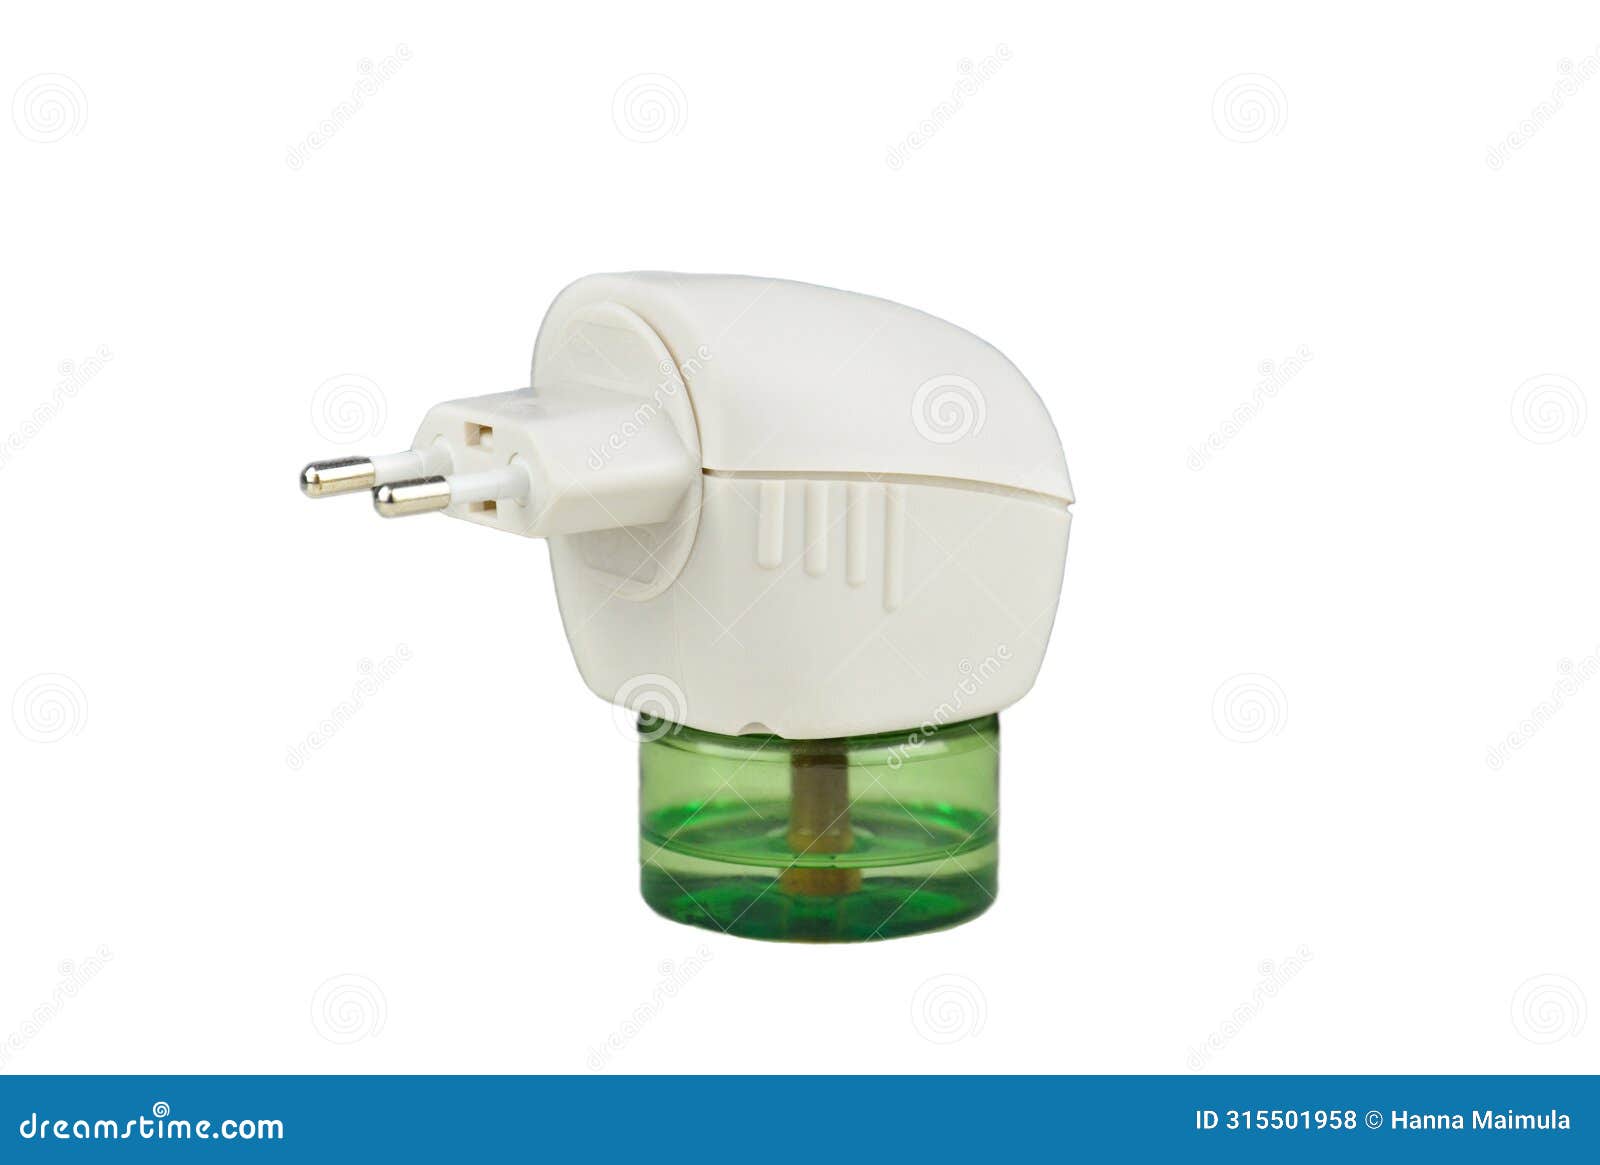 electronic liquid mosquito (gnat) repeller, plug in indoor use for home, deet-free, closeup